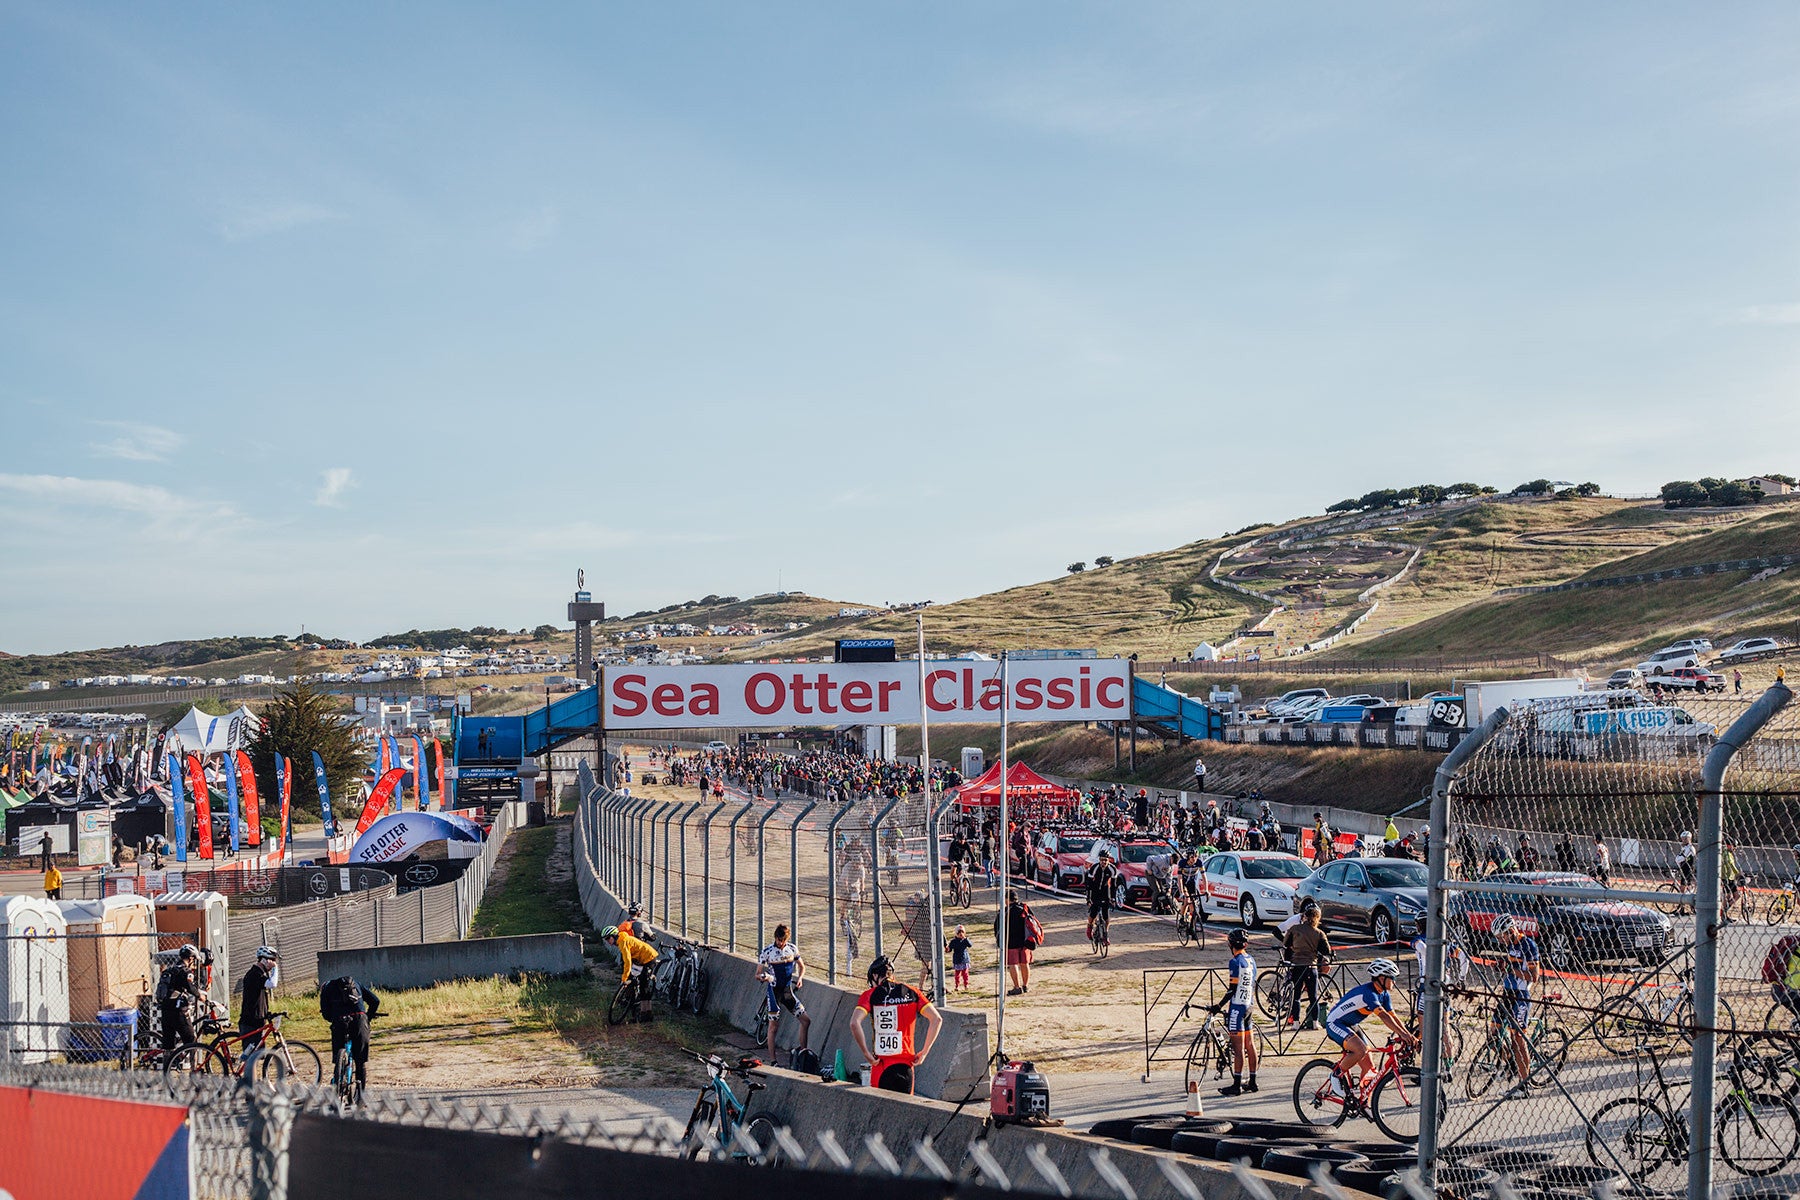 Day 1 of the Sea Otter Classic